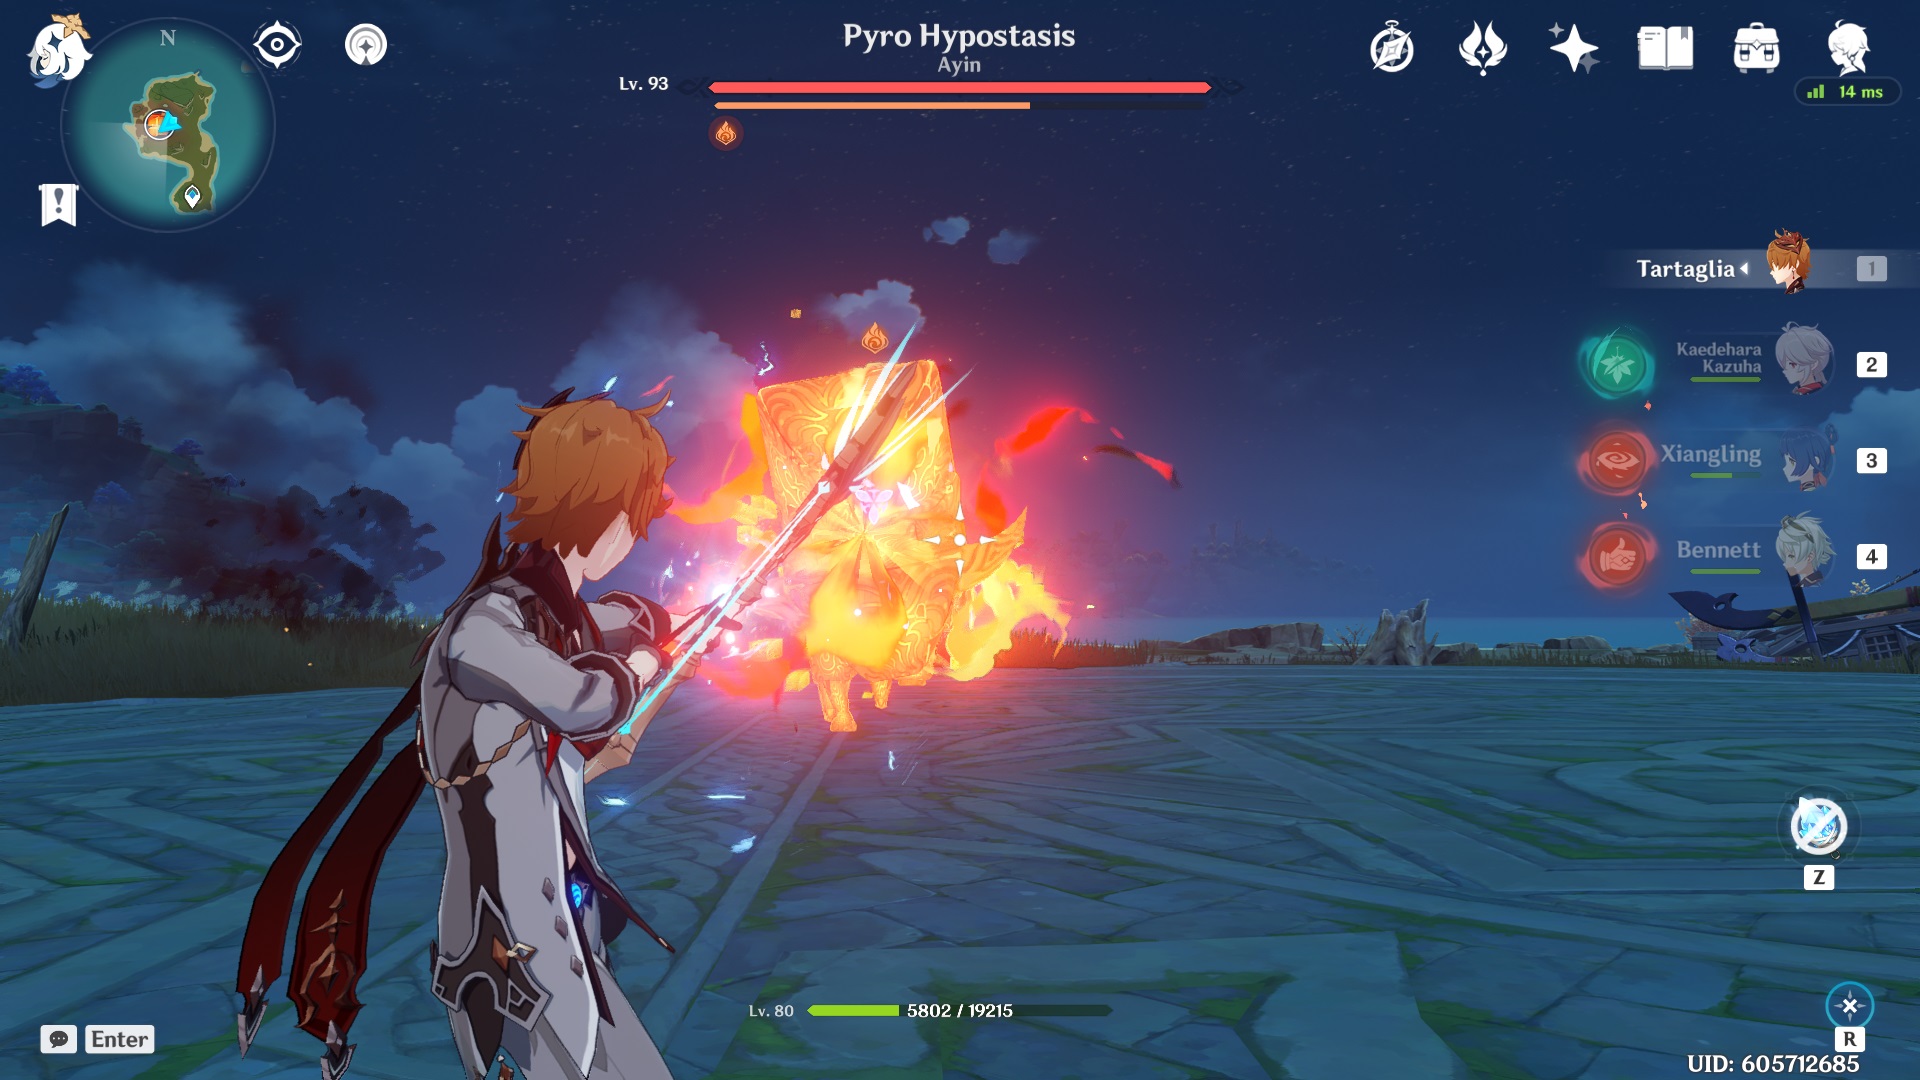 How to find and defeat the Pyro Hypostasis in Genshin Impact